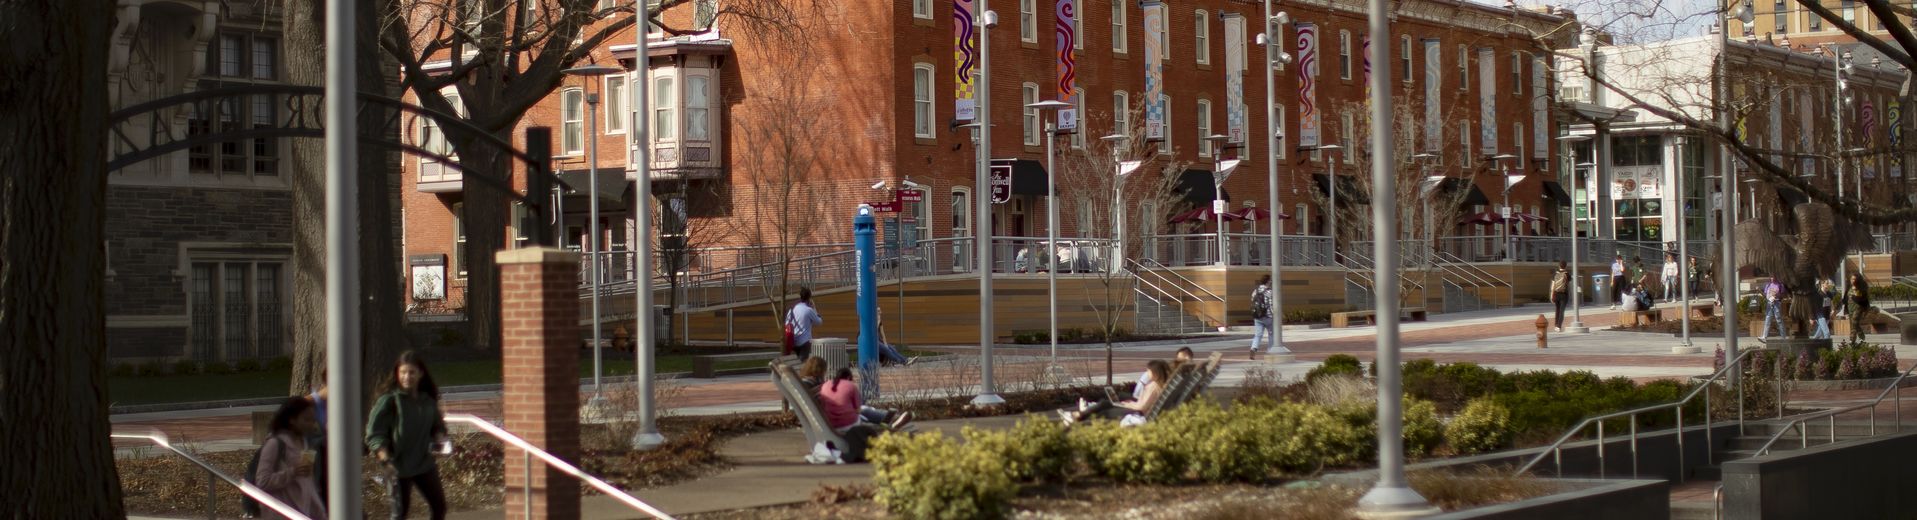 Early spring campus image with students walking down Liacouras walk